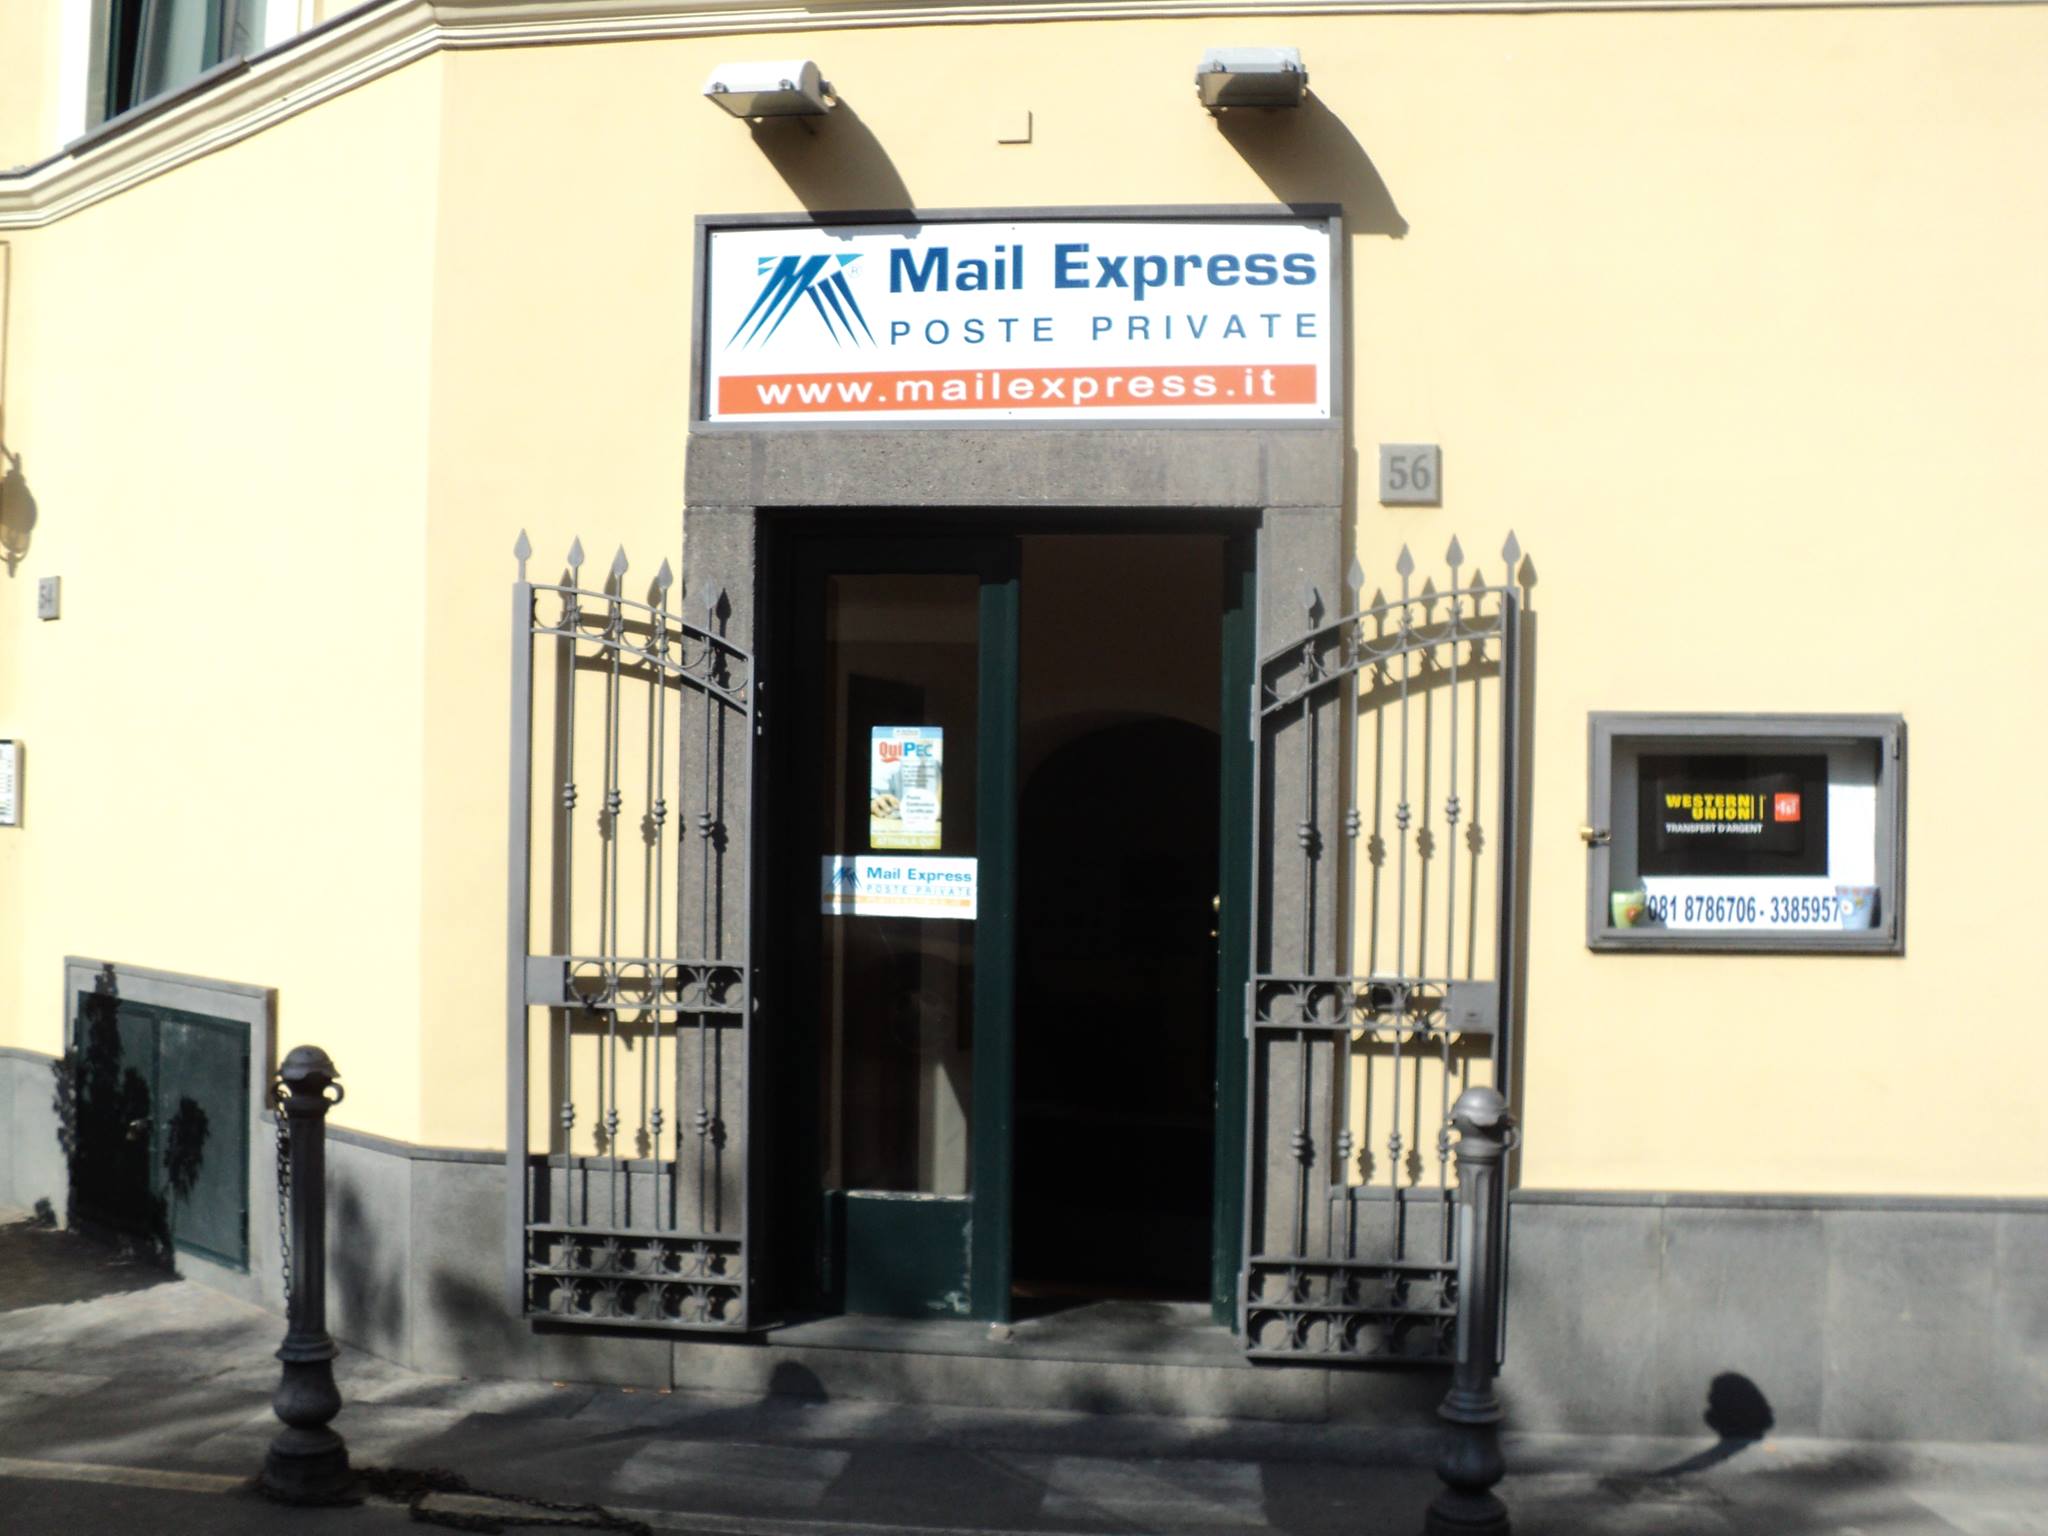 LA MAIL EXPRESS IN PENISOLA